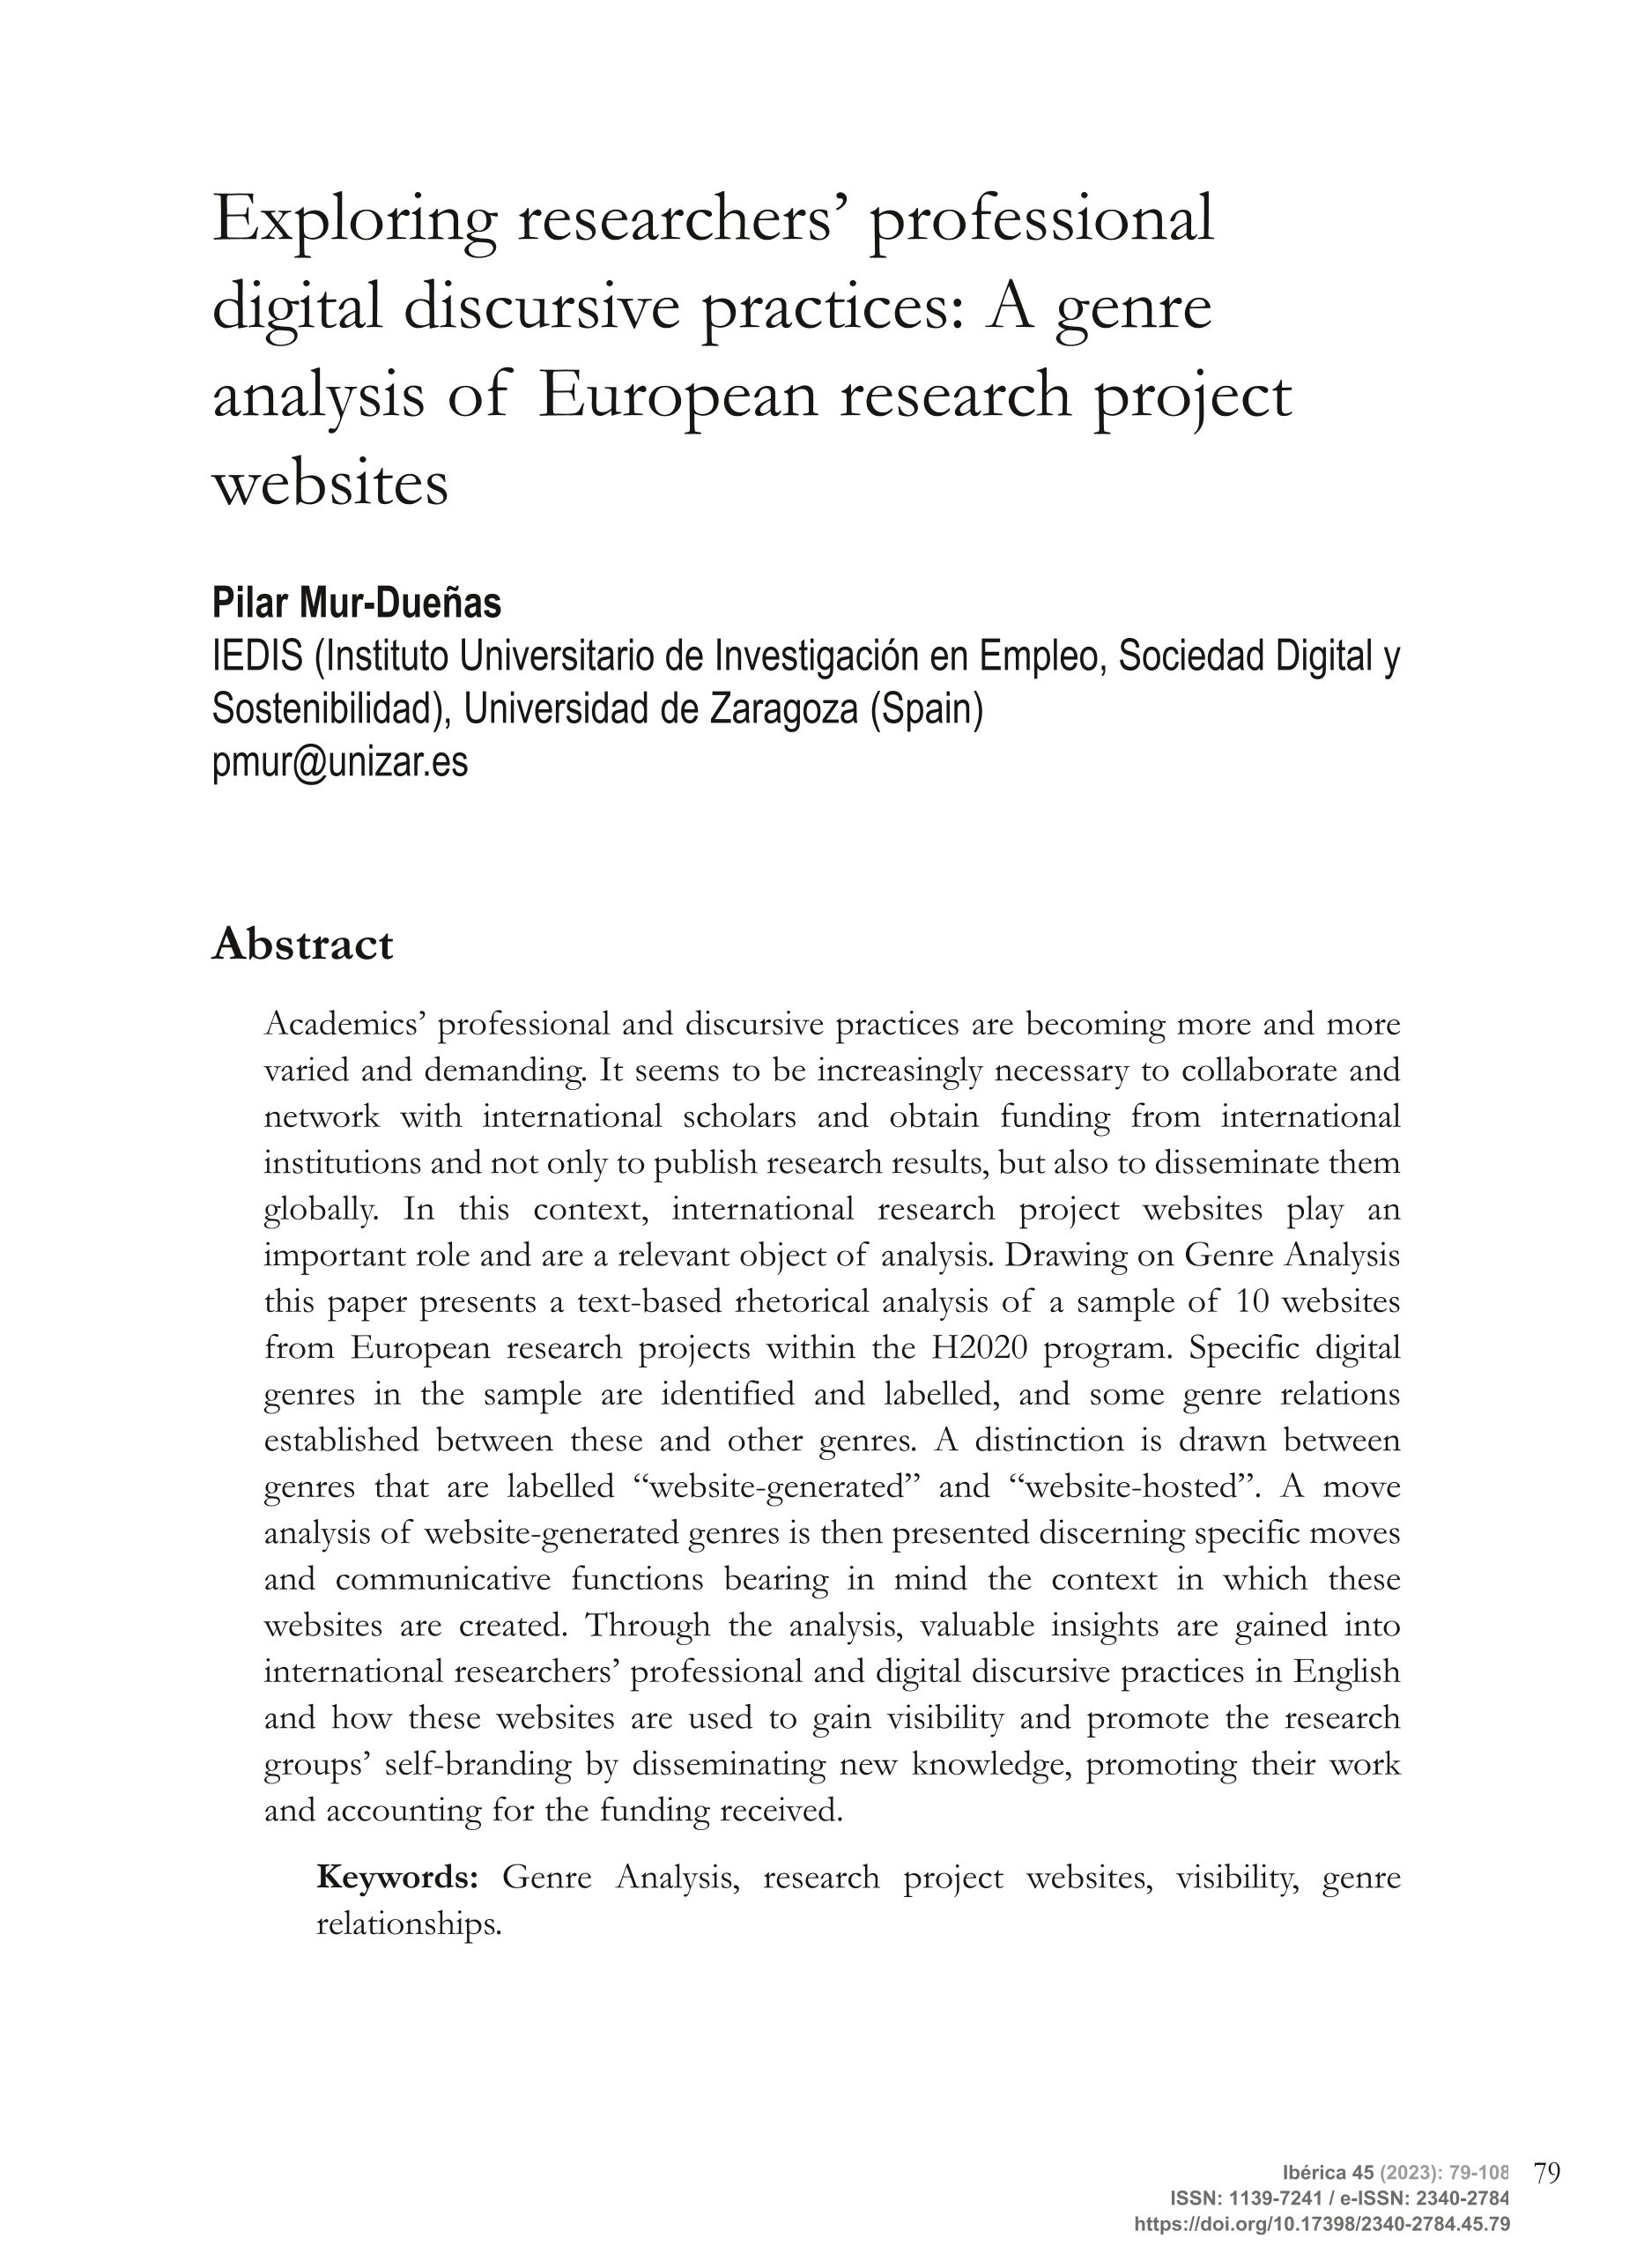 Exploring researchers’ digital professional and discursive practices: A genre analysis of international research project websites